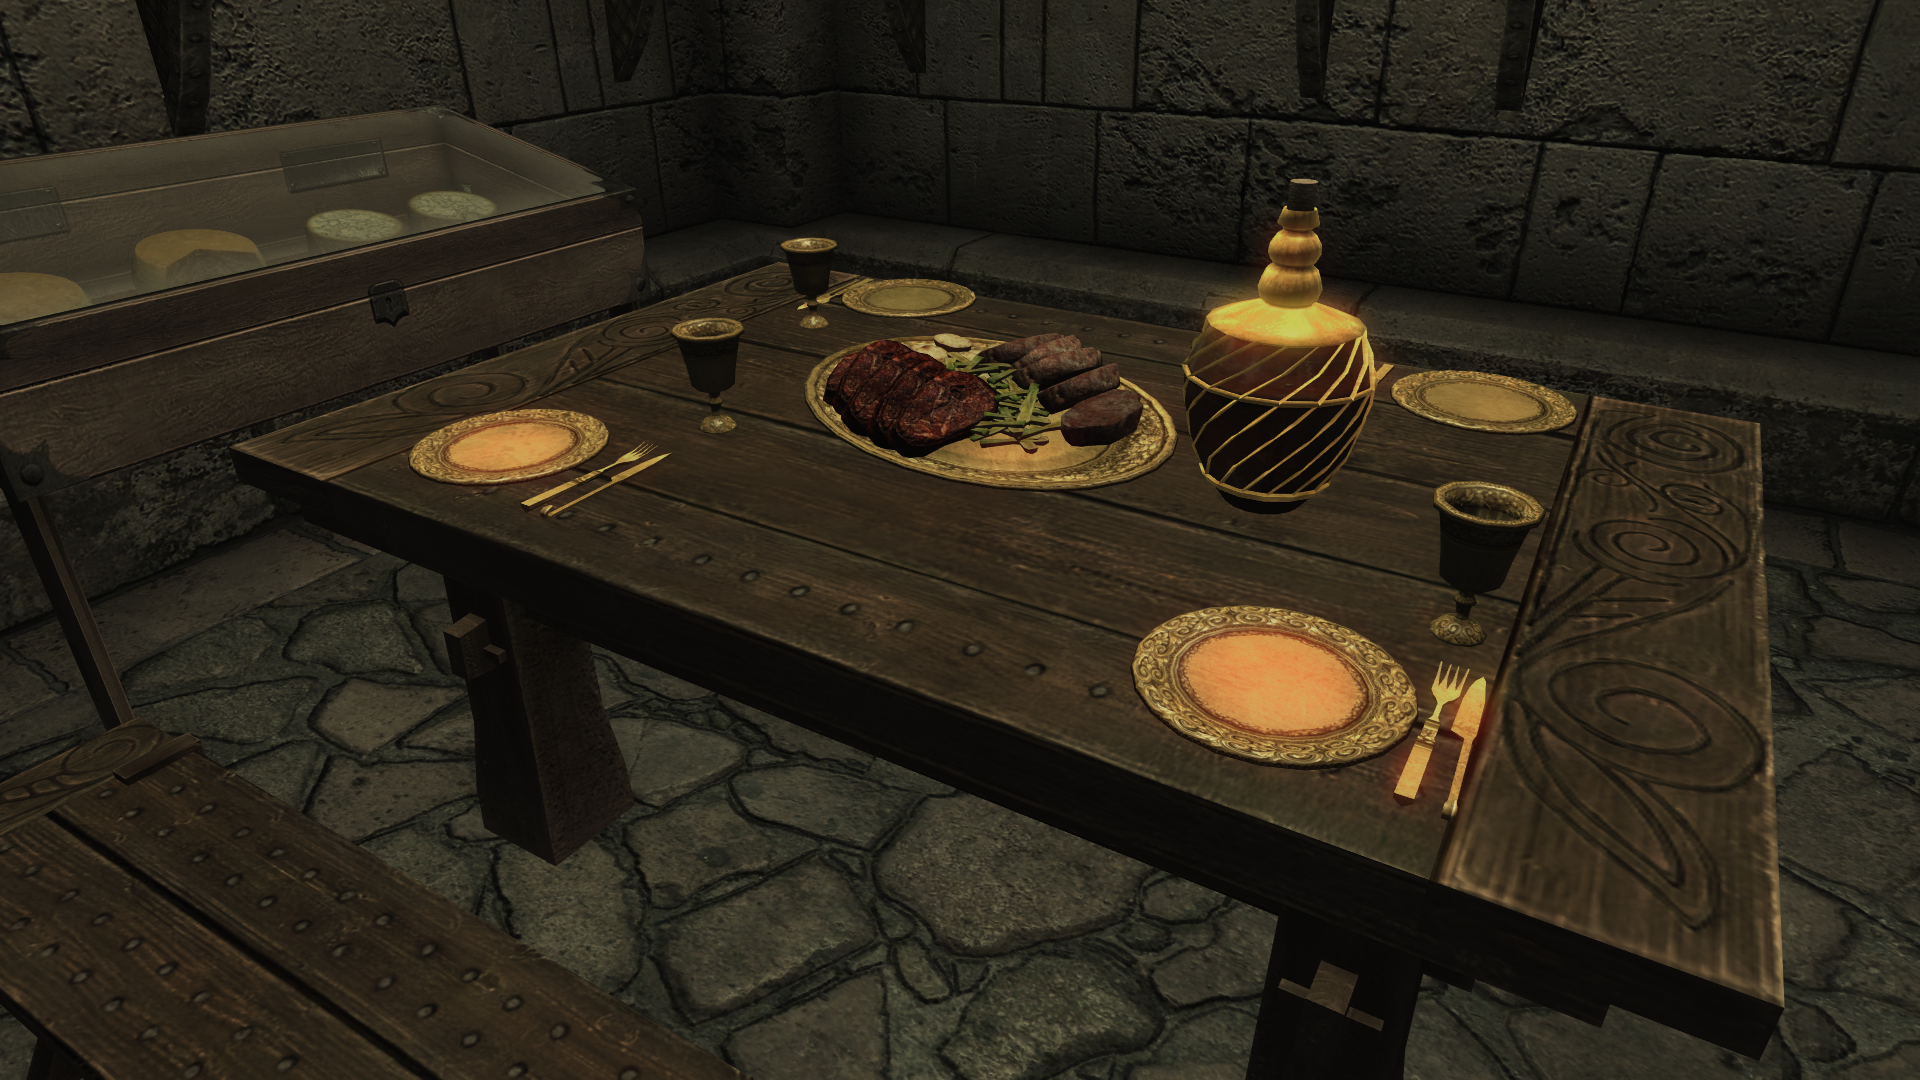 drinking corner, added some food and cutlery